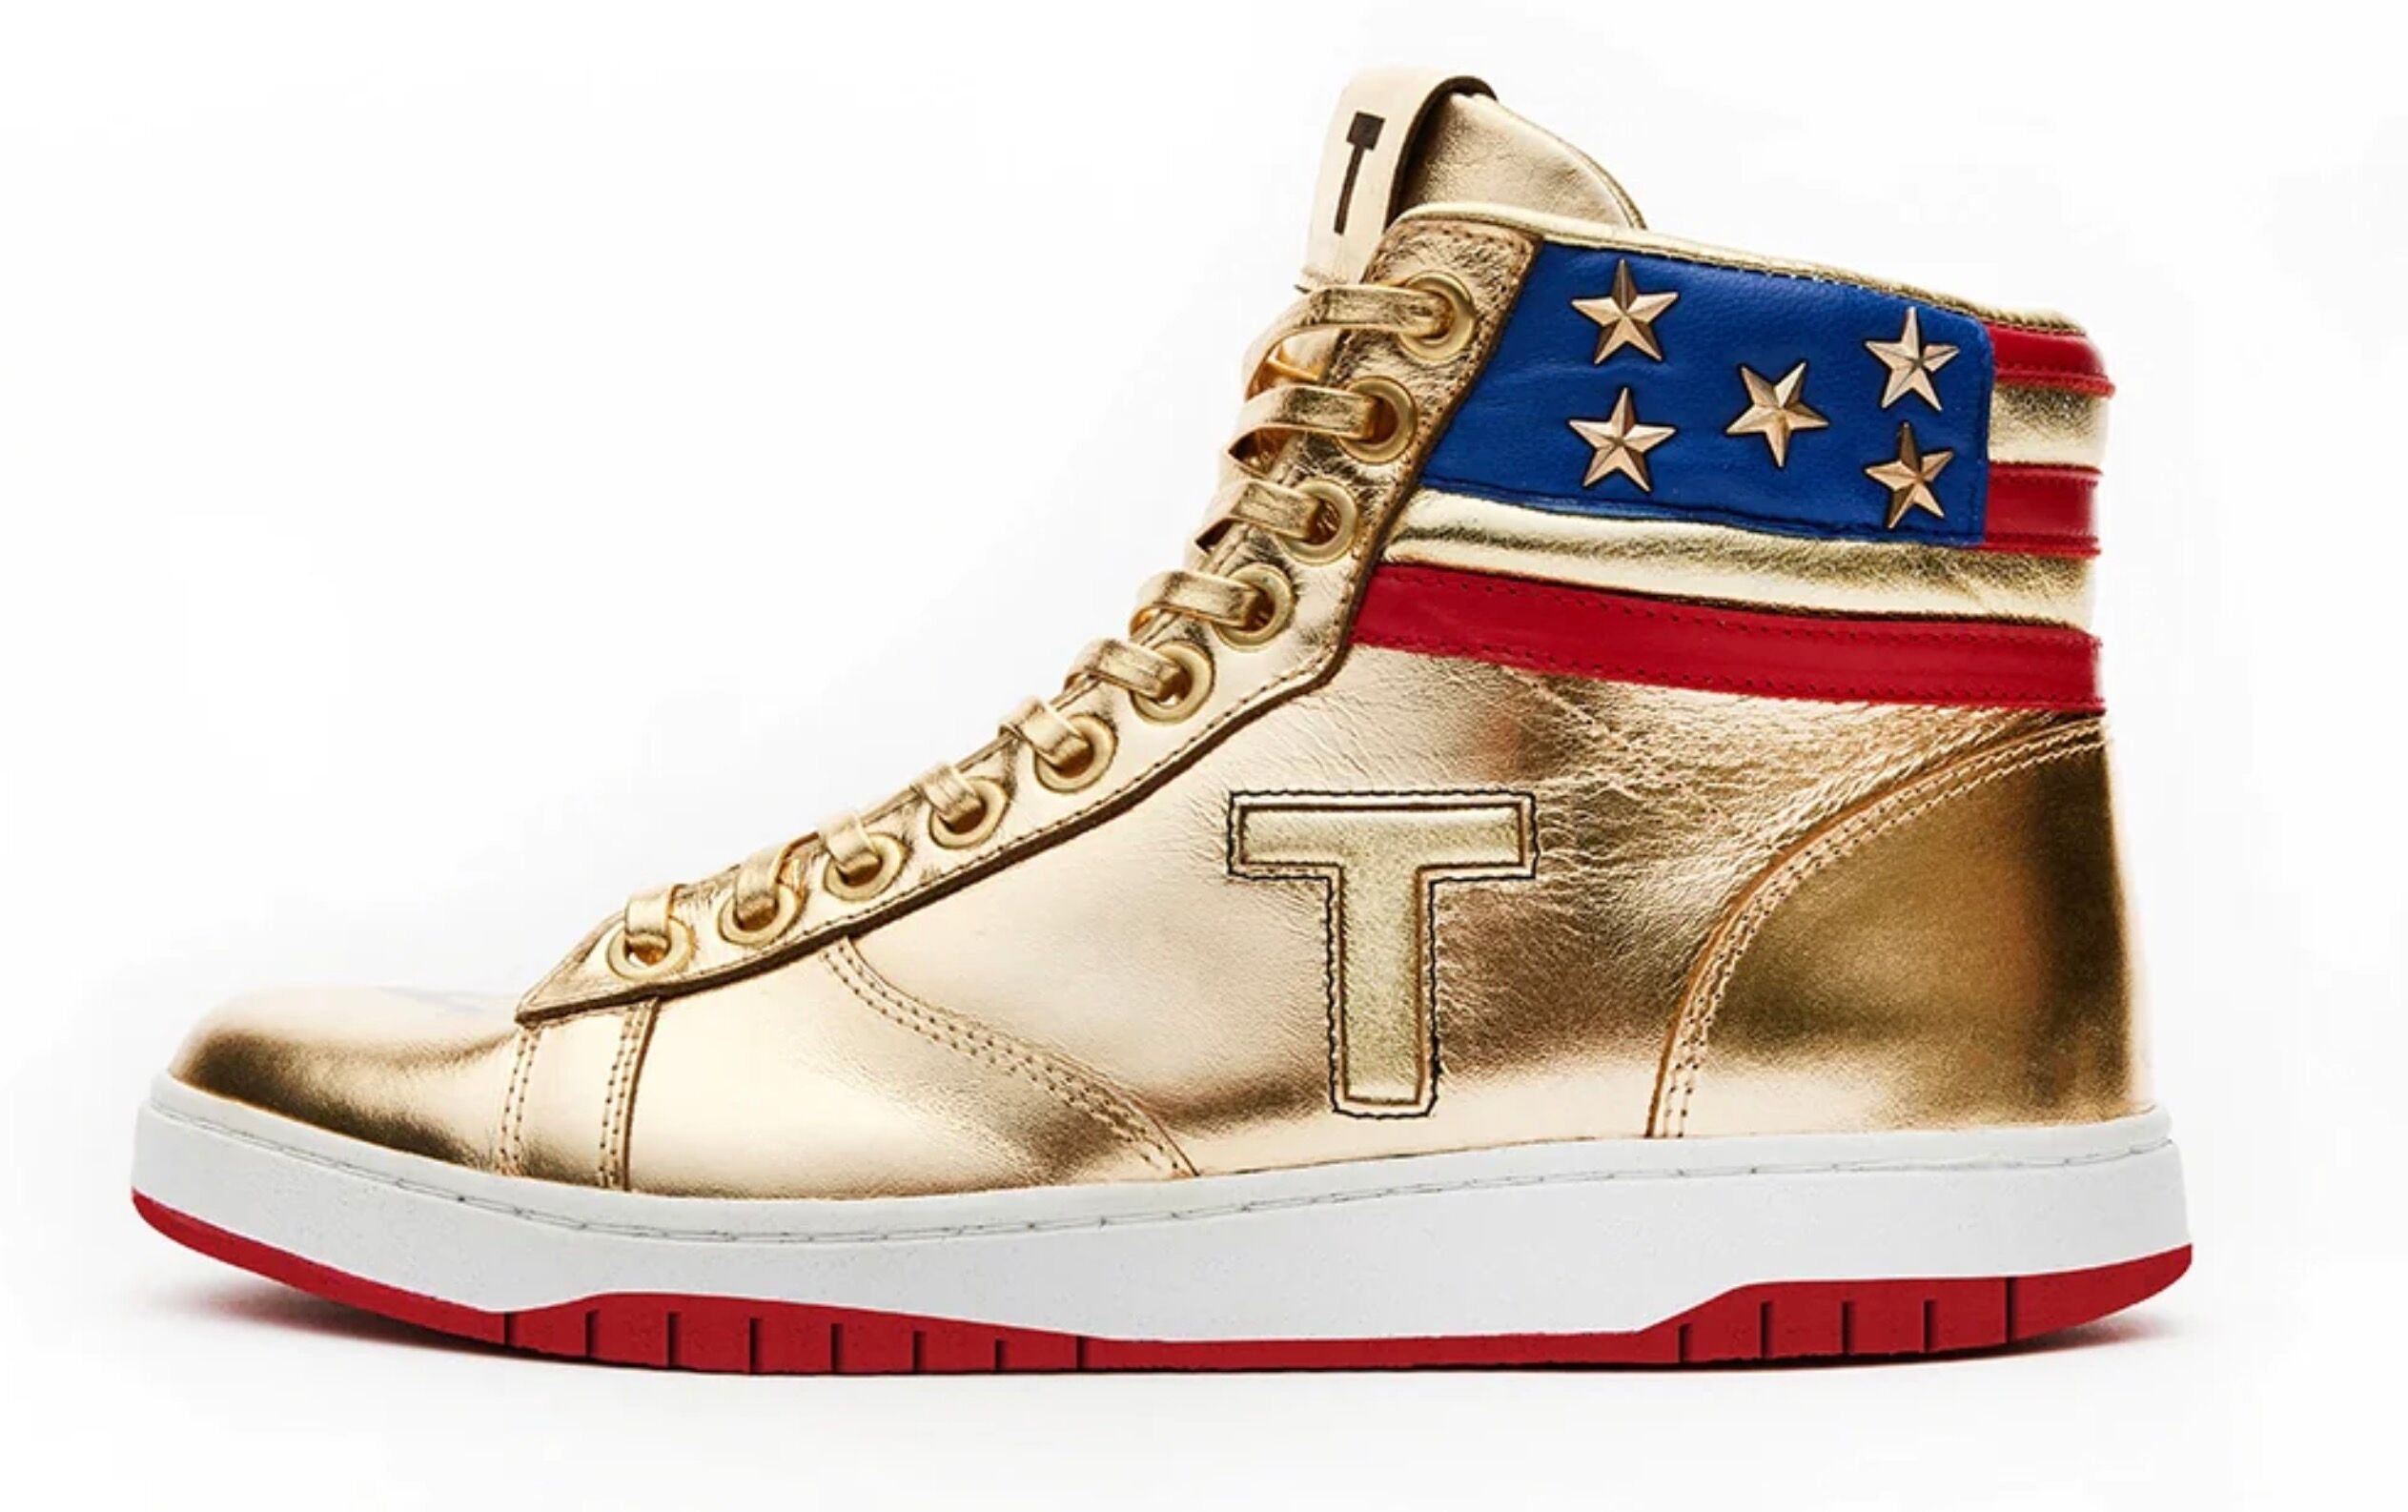 Donald Trump's new sneaker high top, shiny gold with a T on the side and an American flafg emblem on the ankle